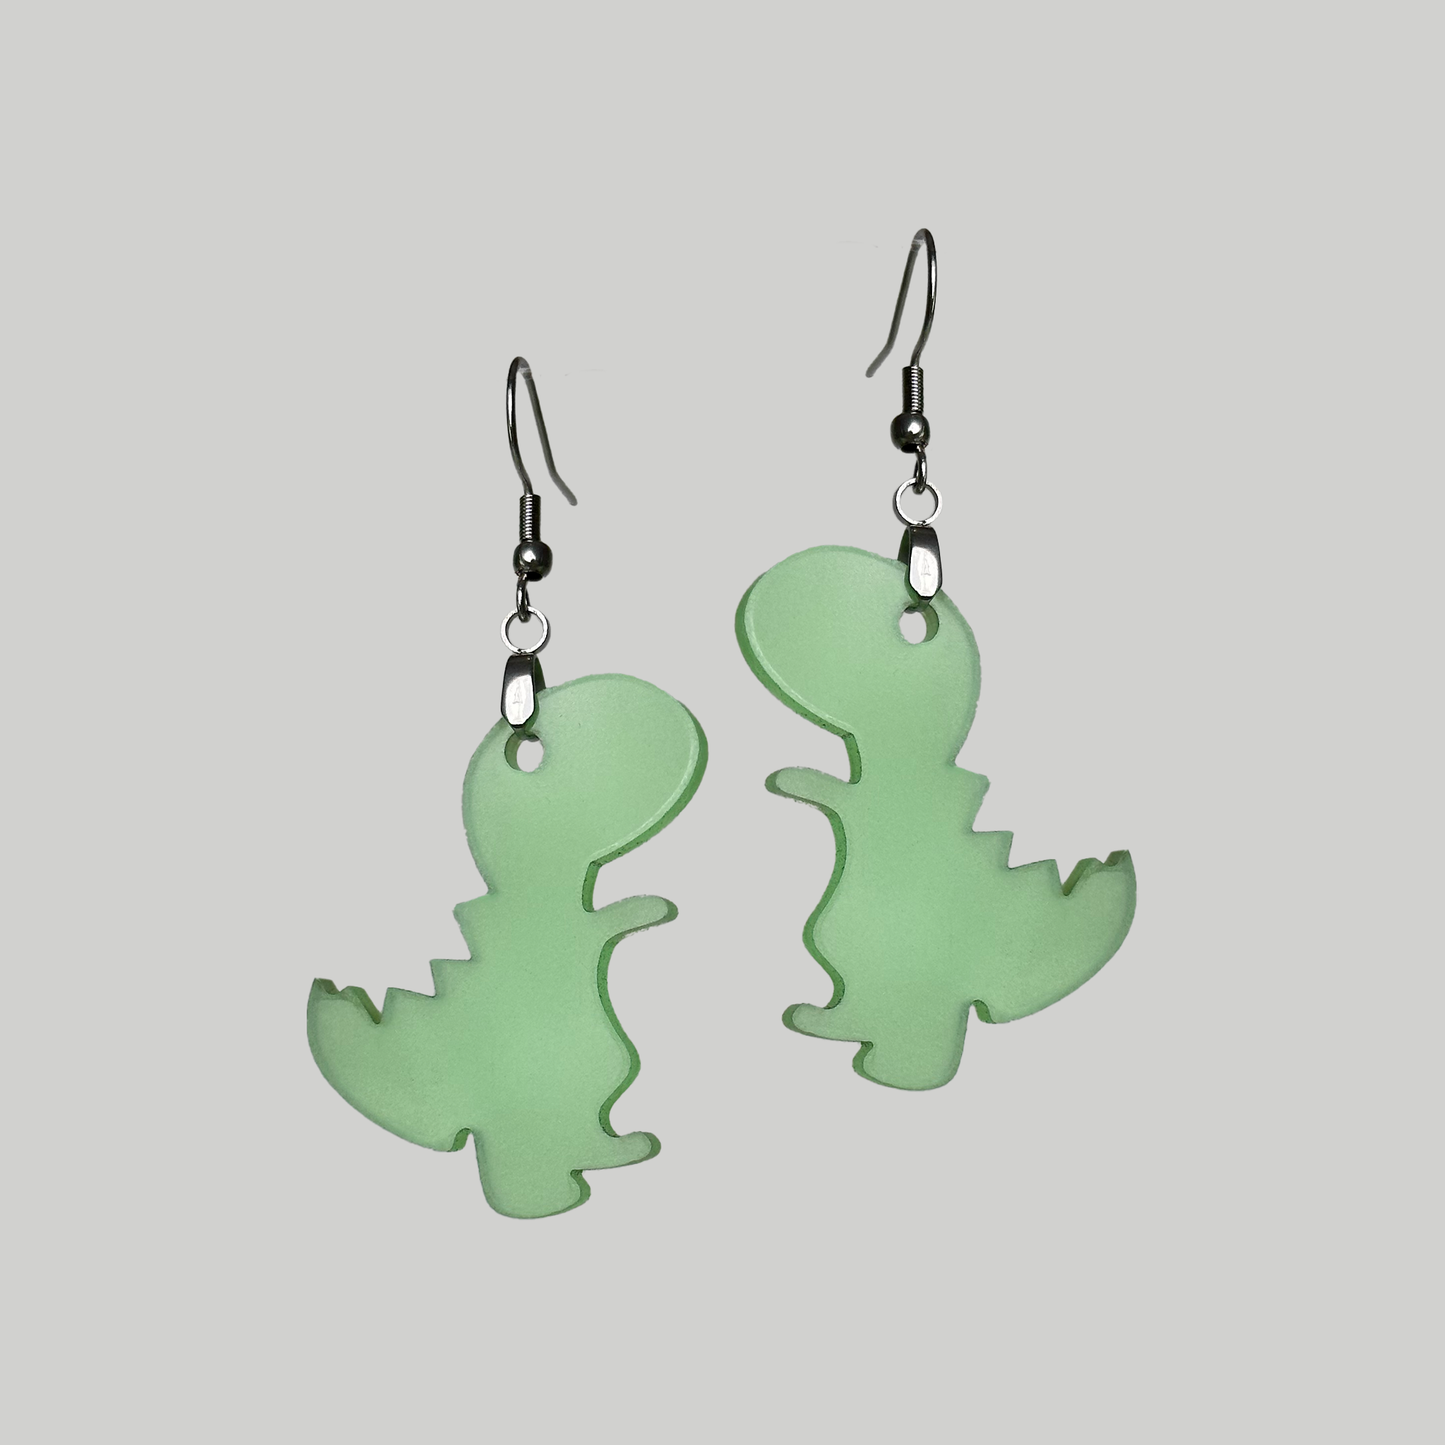 Glow in the dark earrings shaped like dinosaurs, adding a unique and playful element to your style, especially in low-light settings.